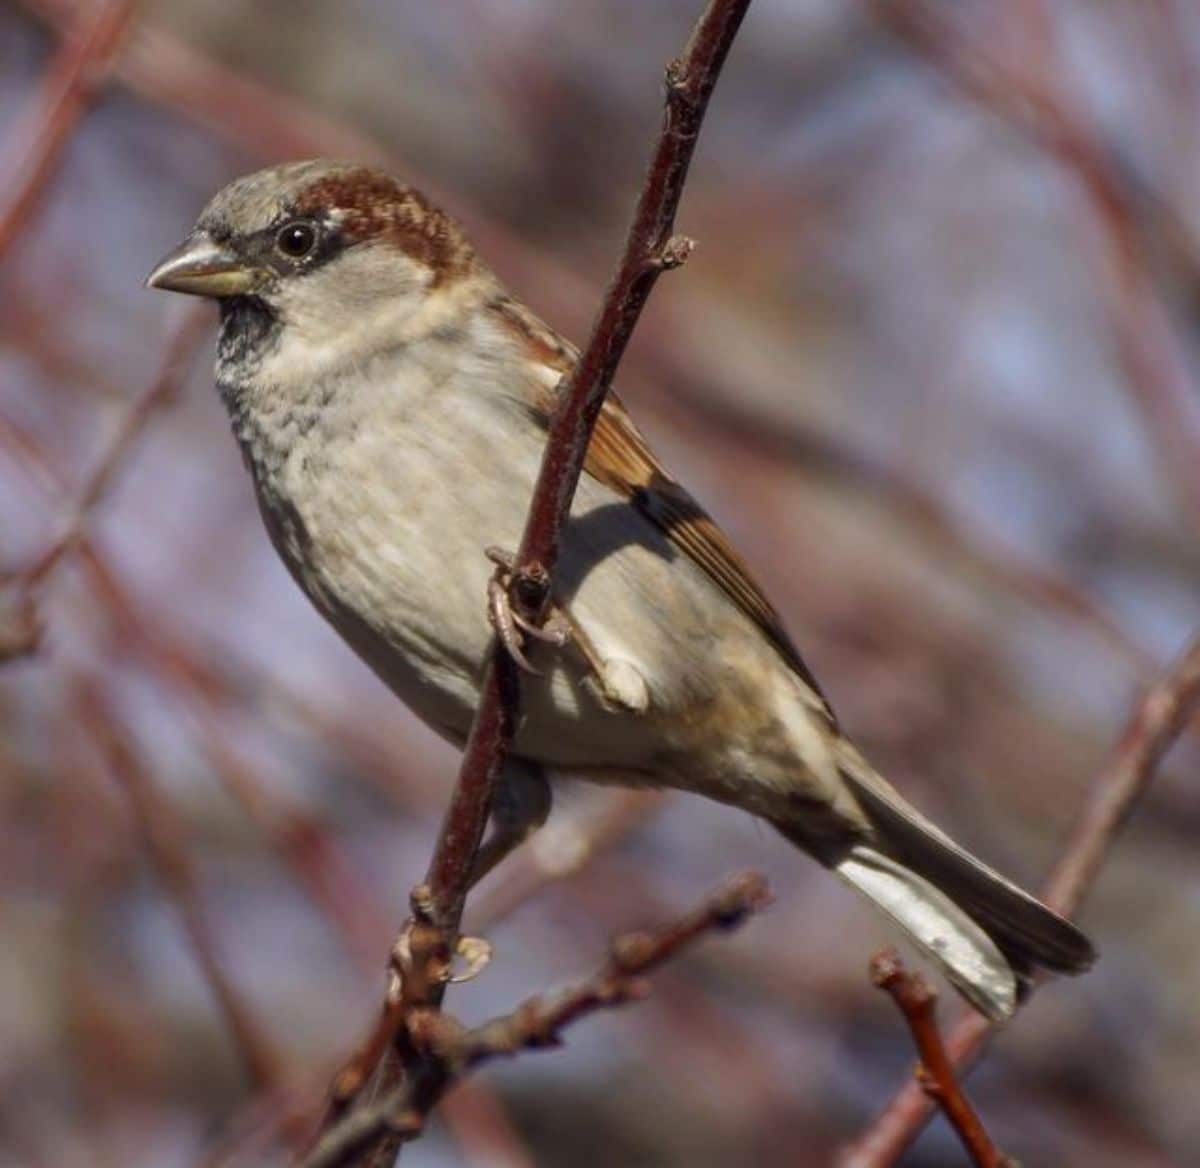 An adorable Sparrow perched on a thin branch.